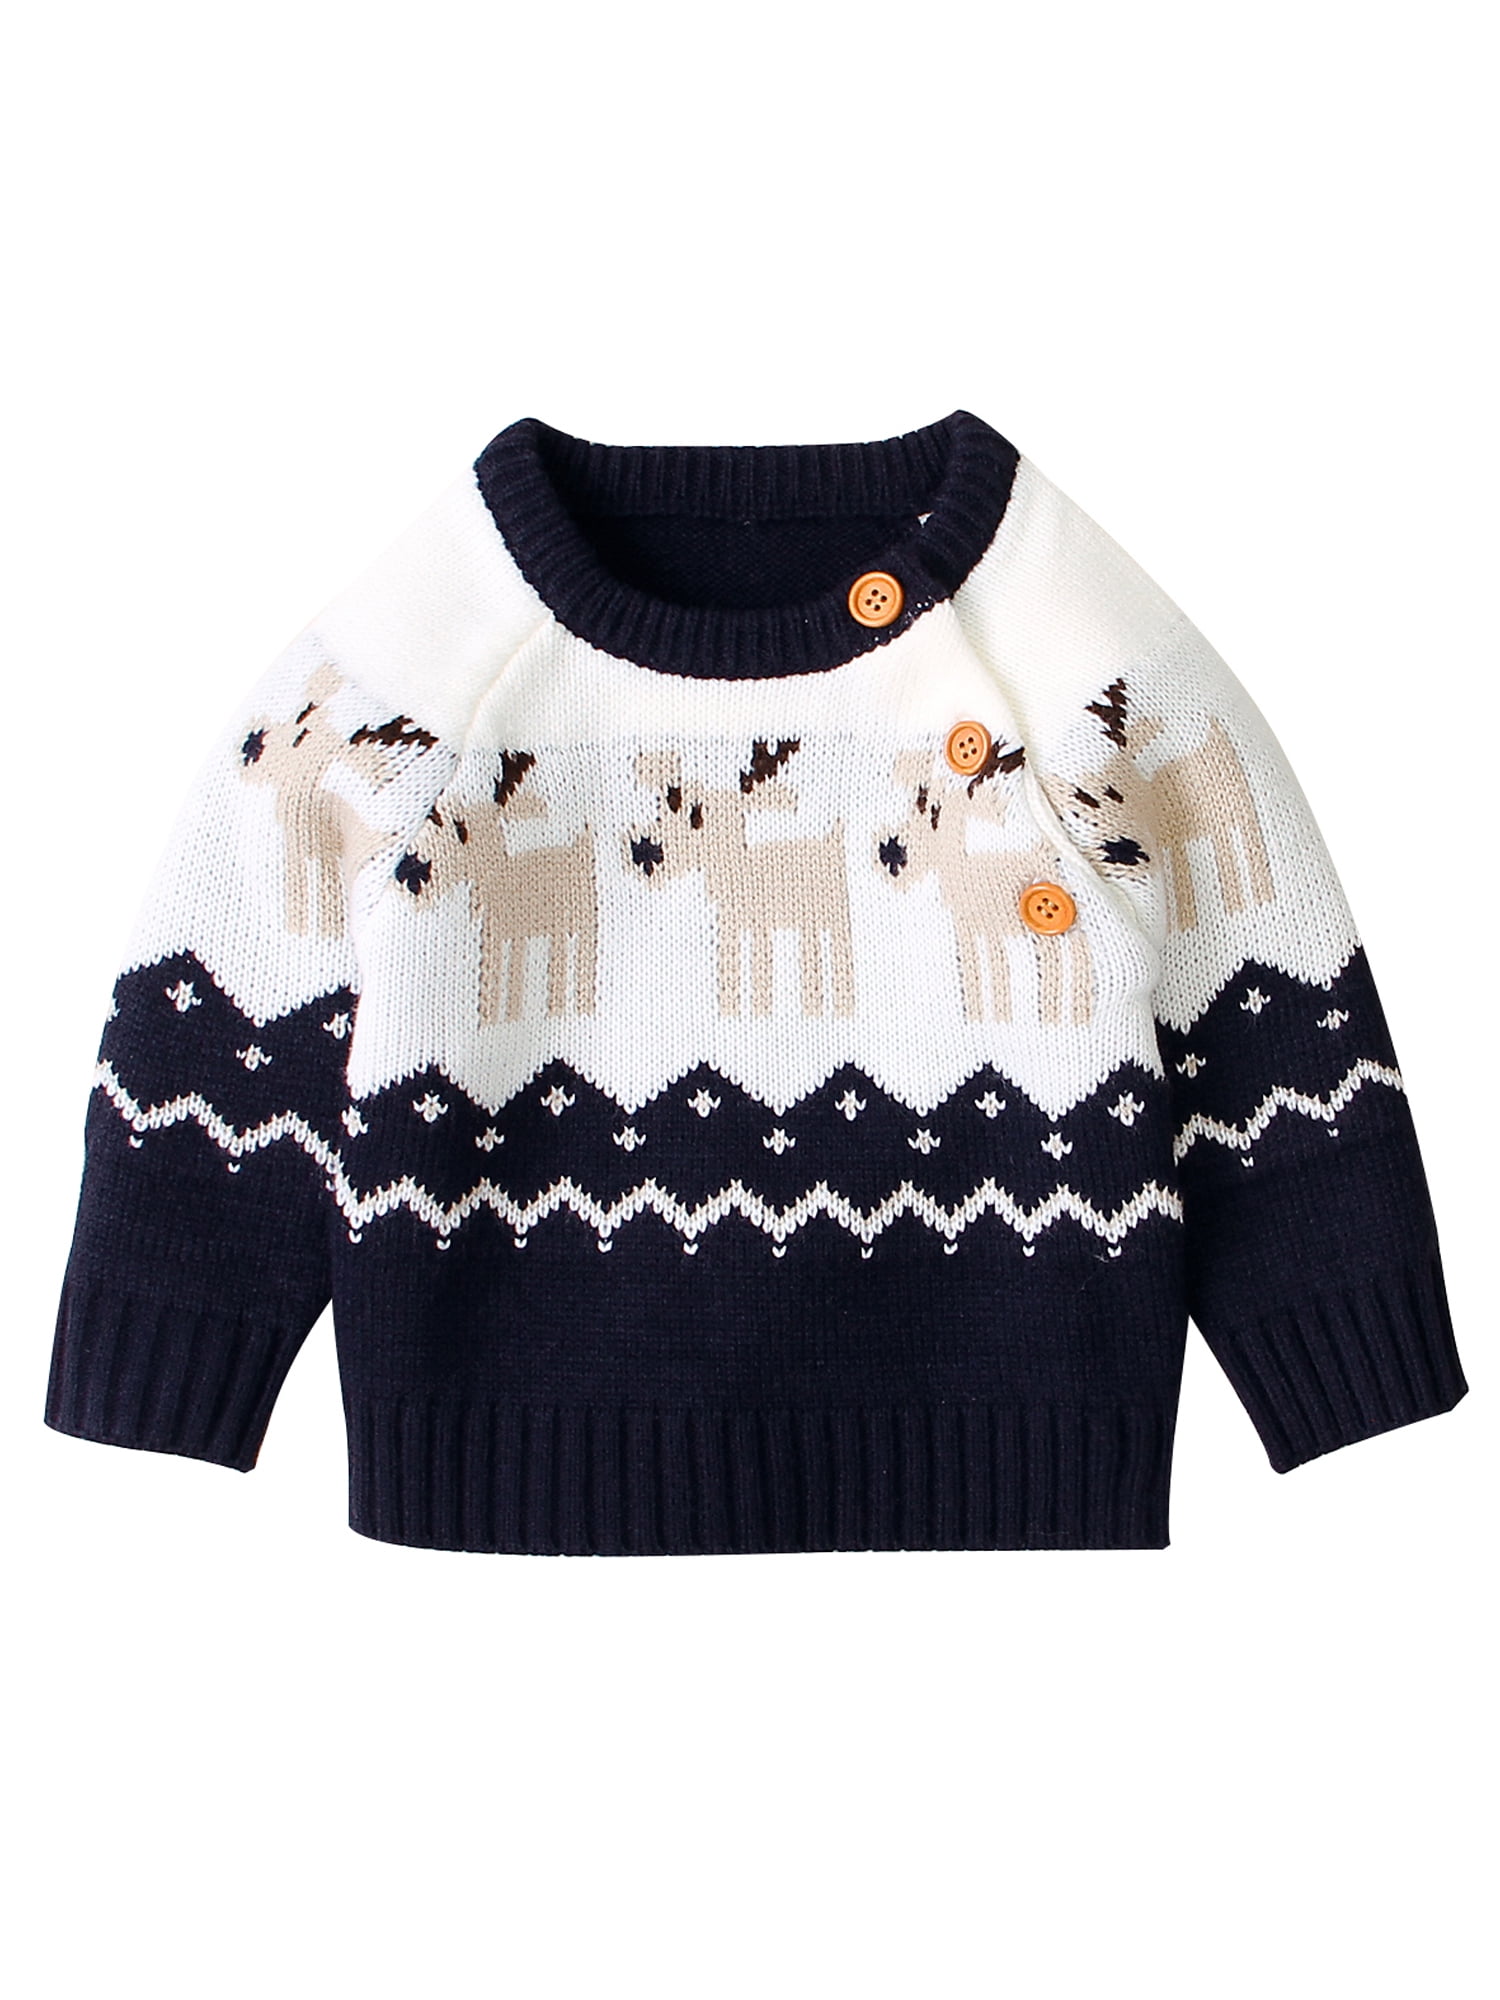 Amaone Baby Sweater Girls Boys for 6-24Months Cartoon Cat Pullover Cute Warm Newborn Knitwear Infant Unisex Tops Clothes 